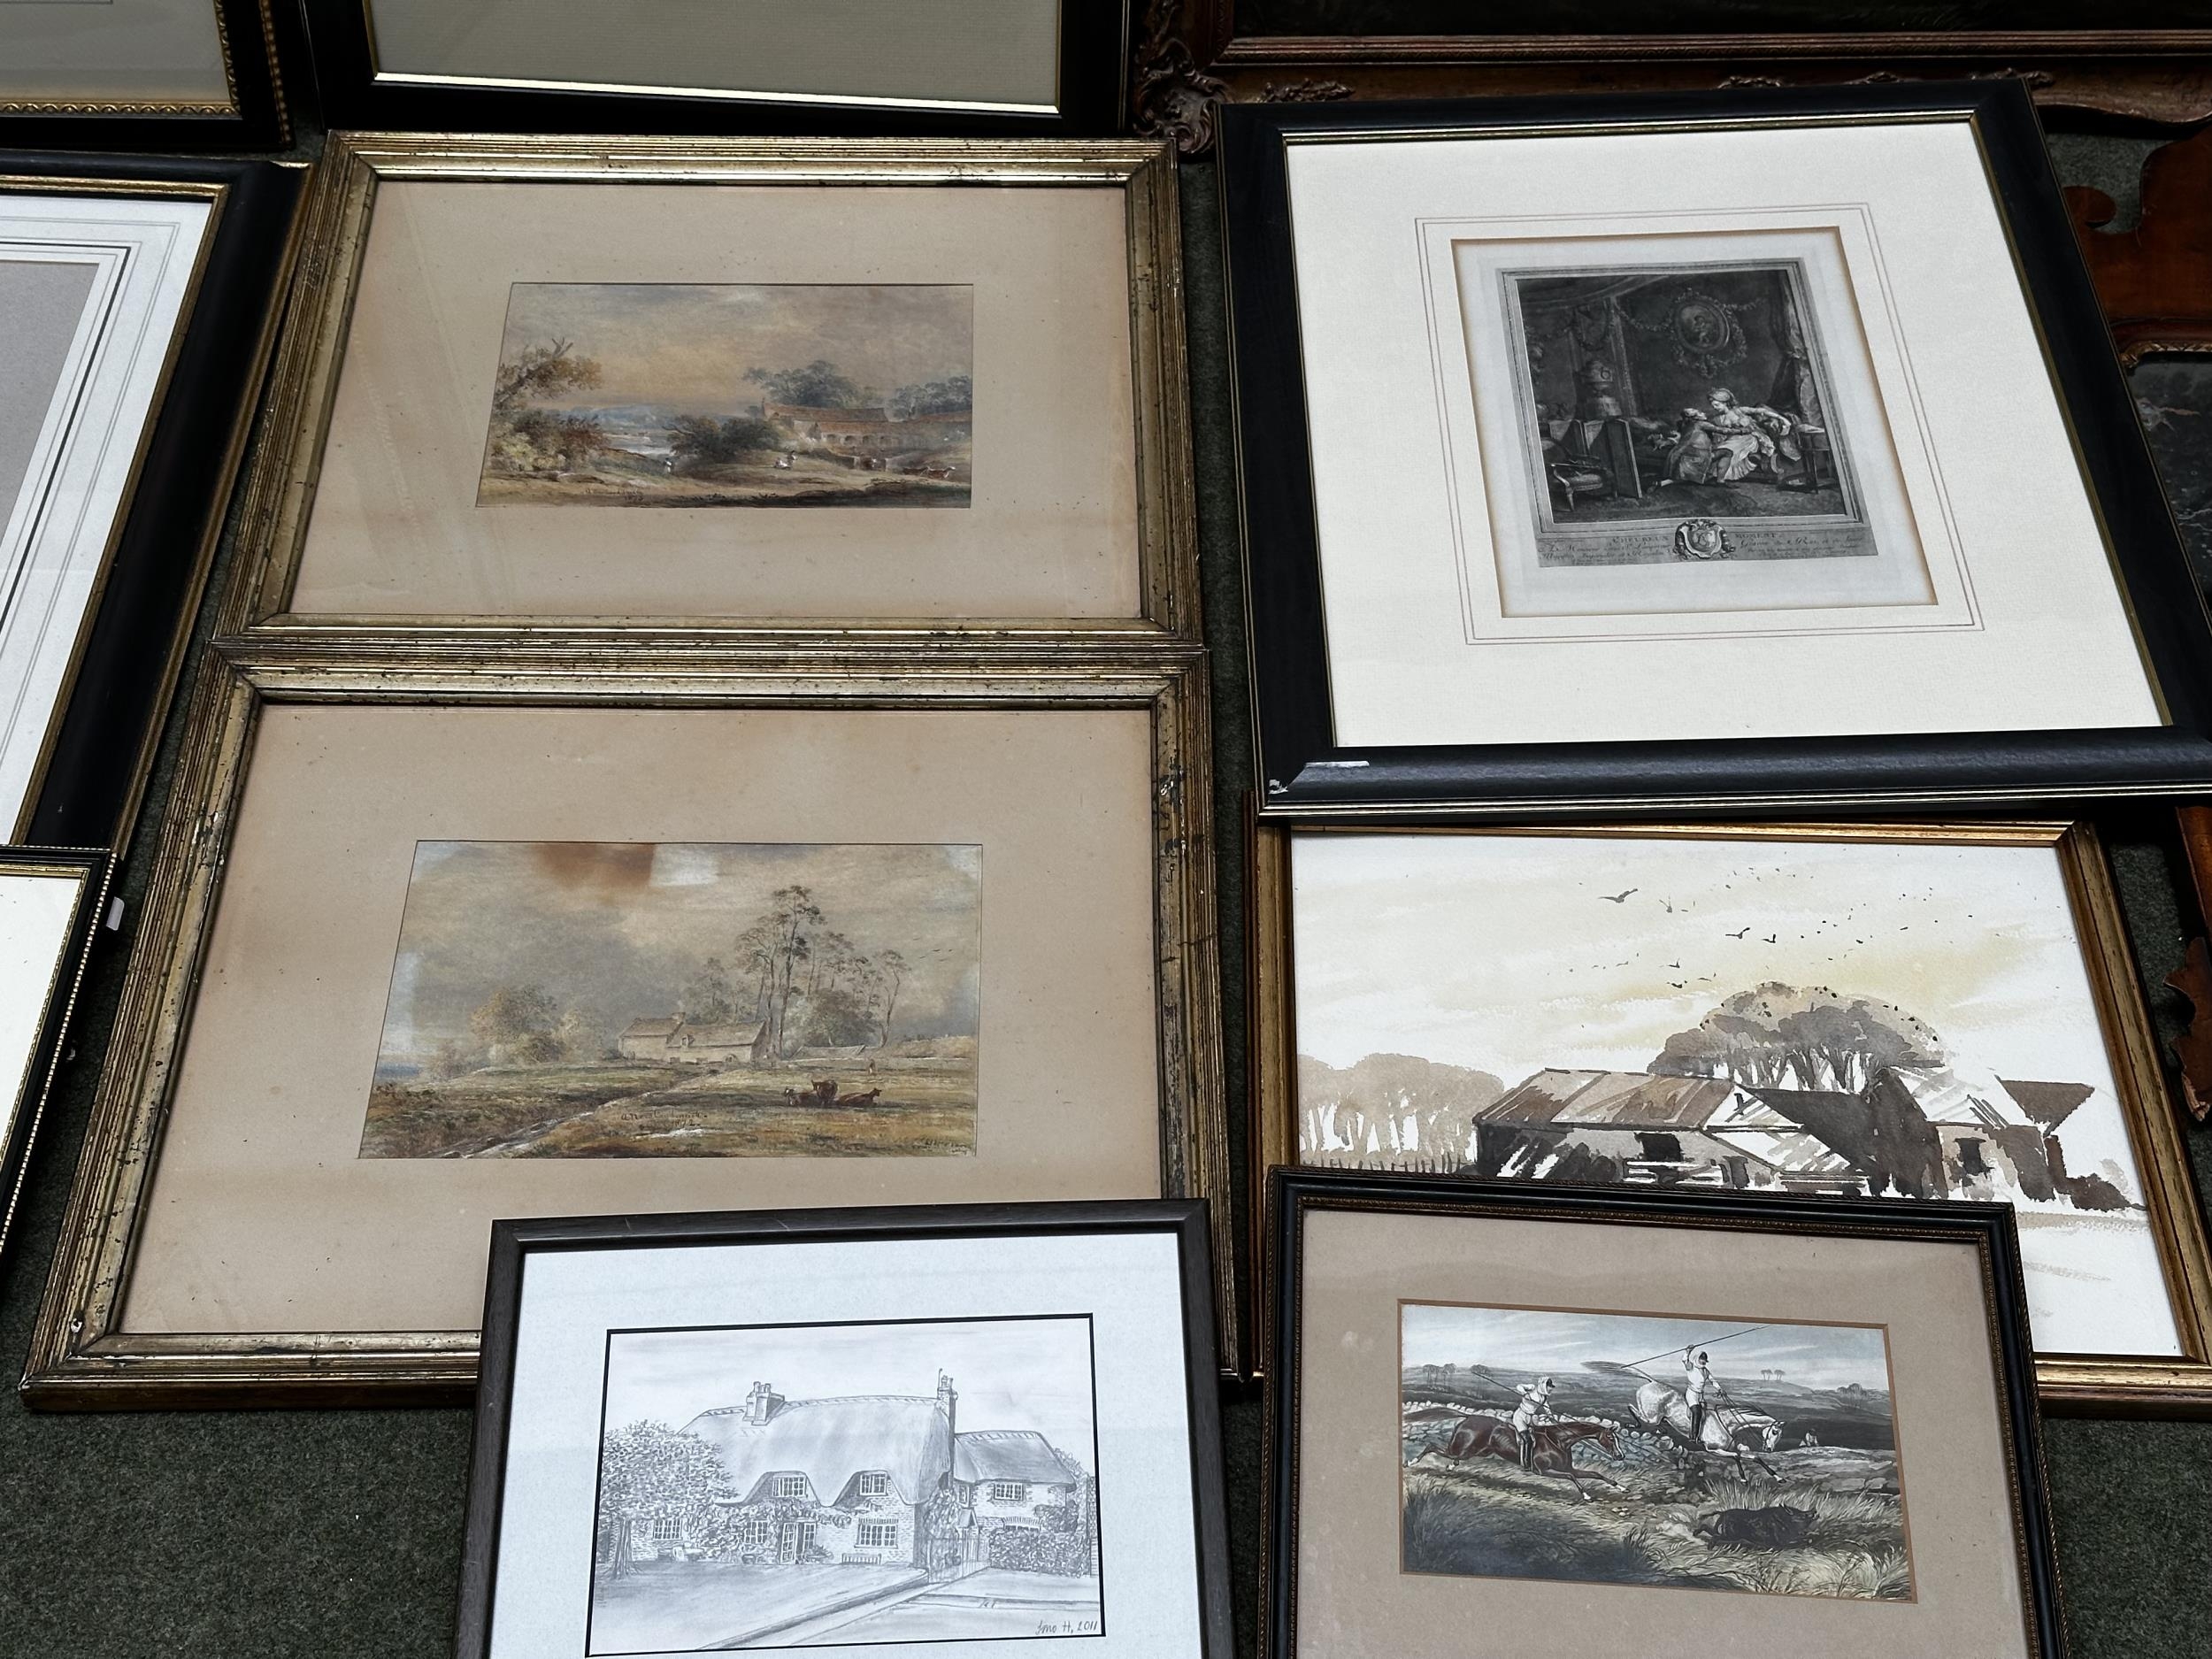 A large collection of decorative framed pictures and prints, see images, some with damage; and a - Image 5 of 7